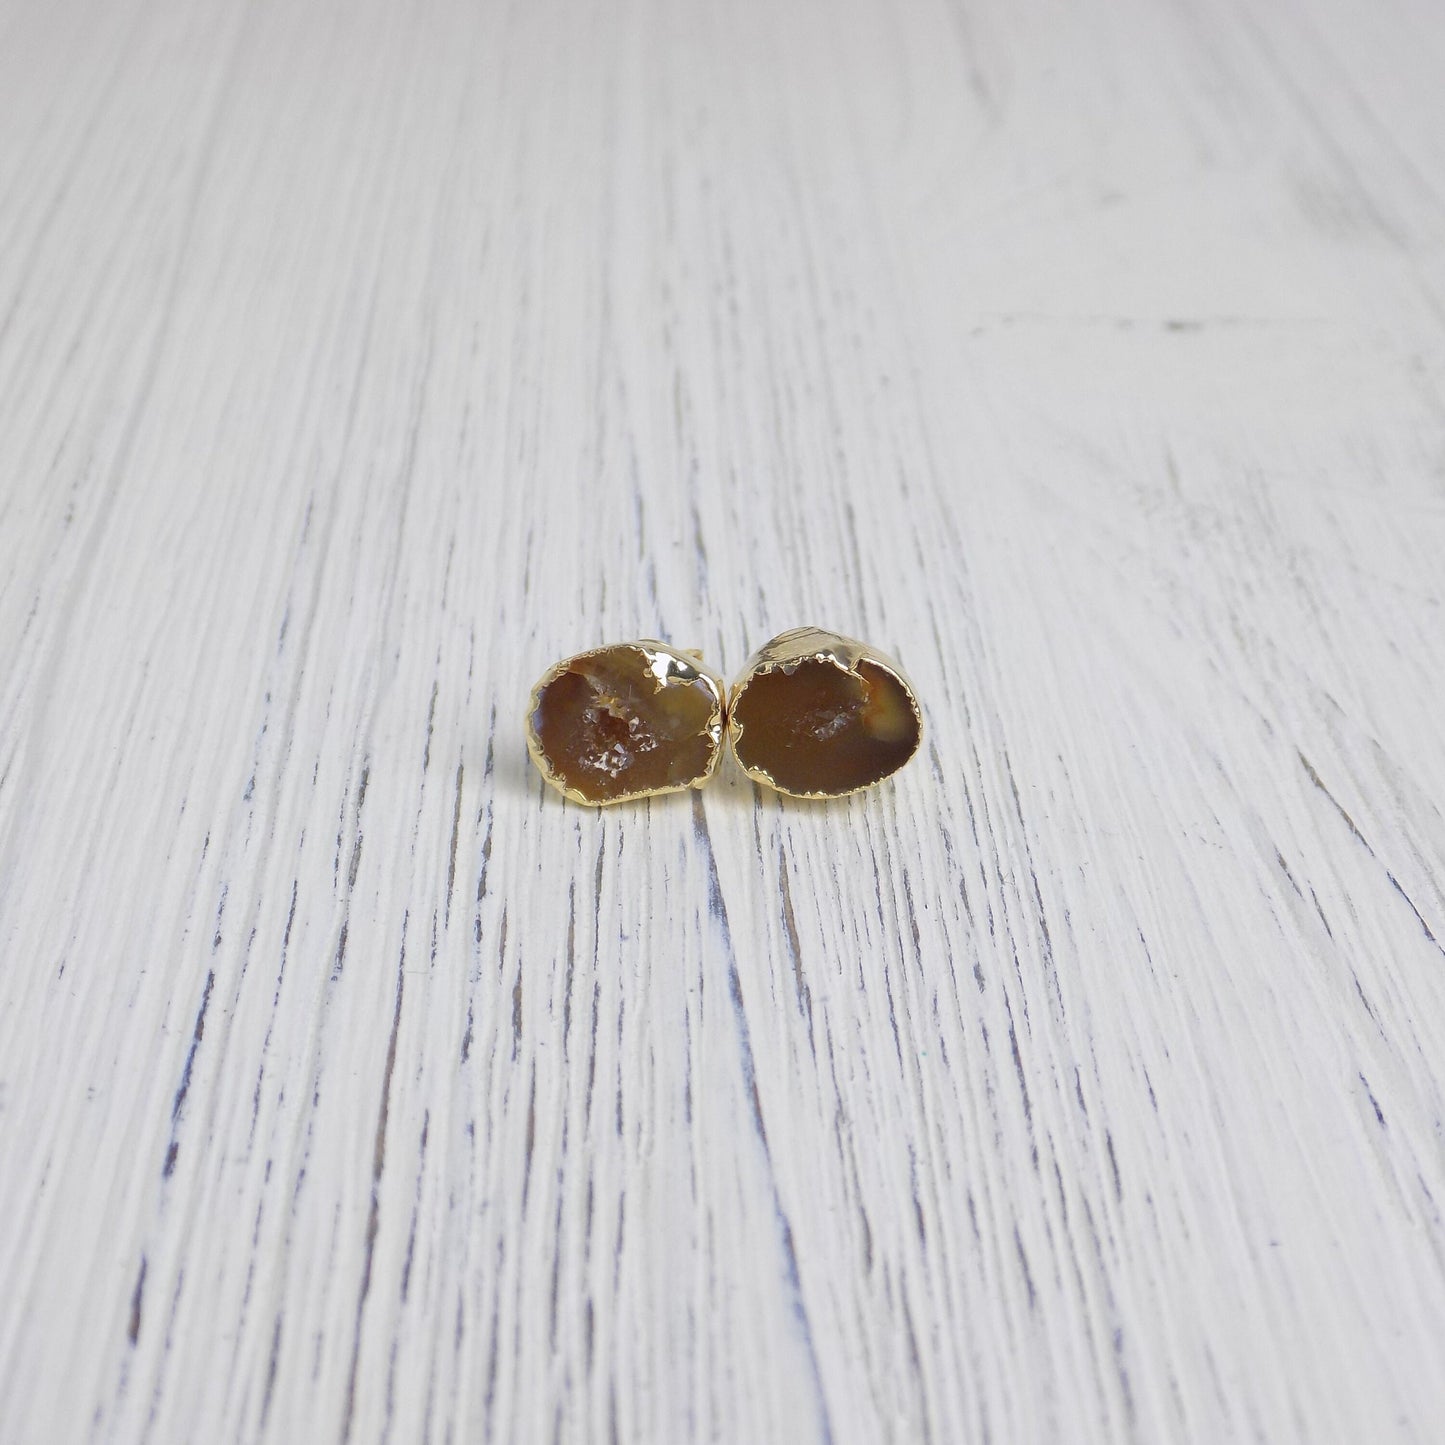 Brown Geode Earrings Studs Gold Dipped Natural Gemstone, Gifts For Mom, G14-135